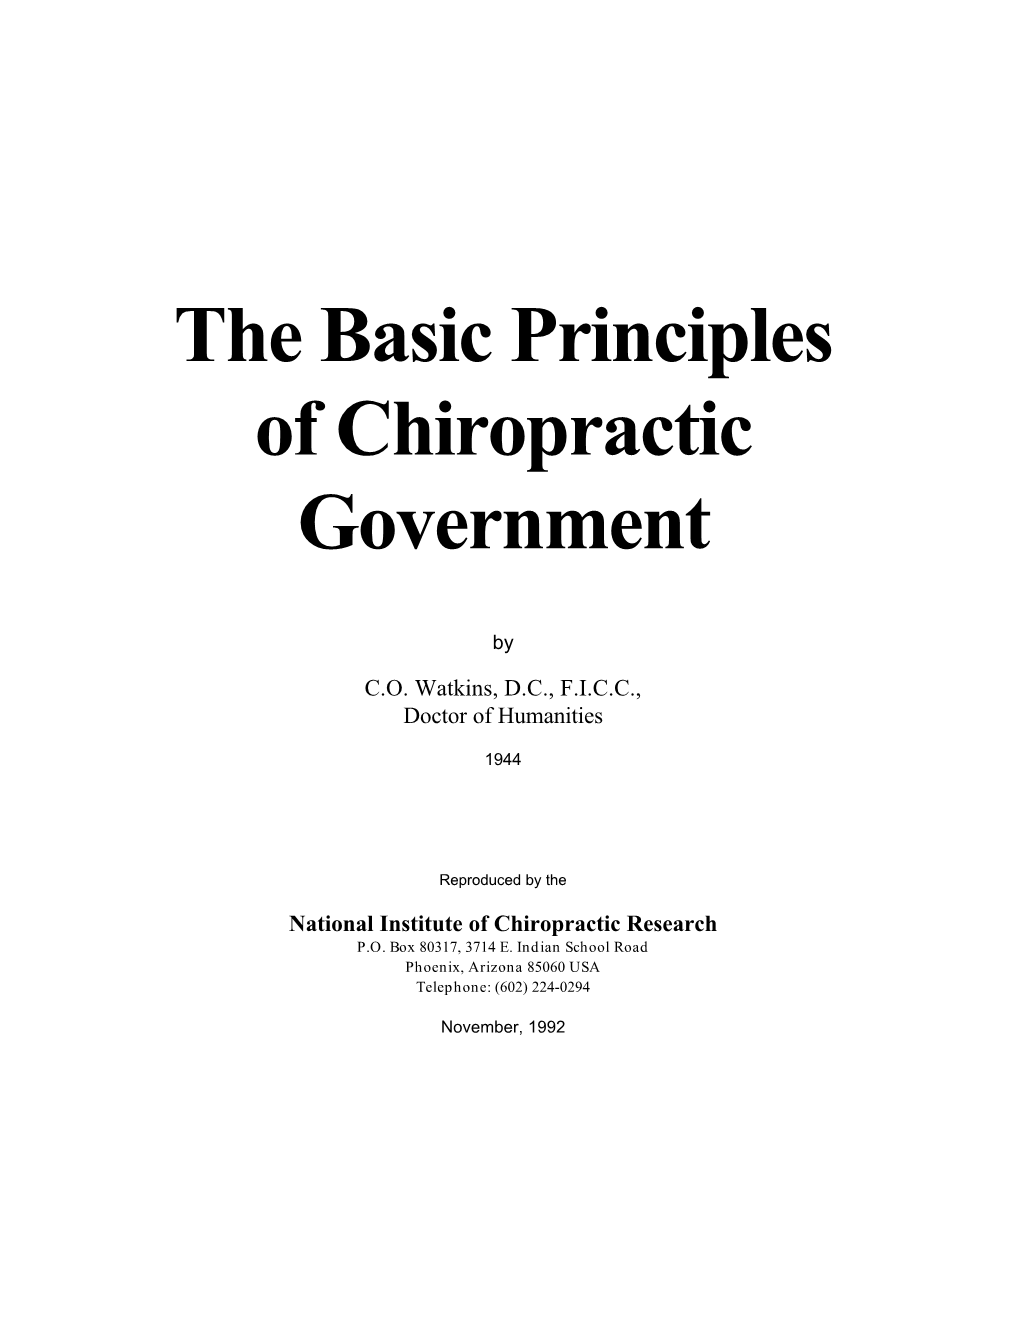 The Basic Principles of Chiropractic Government